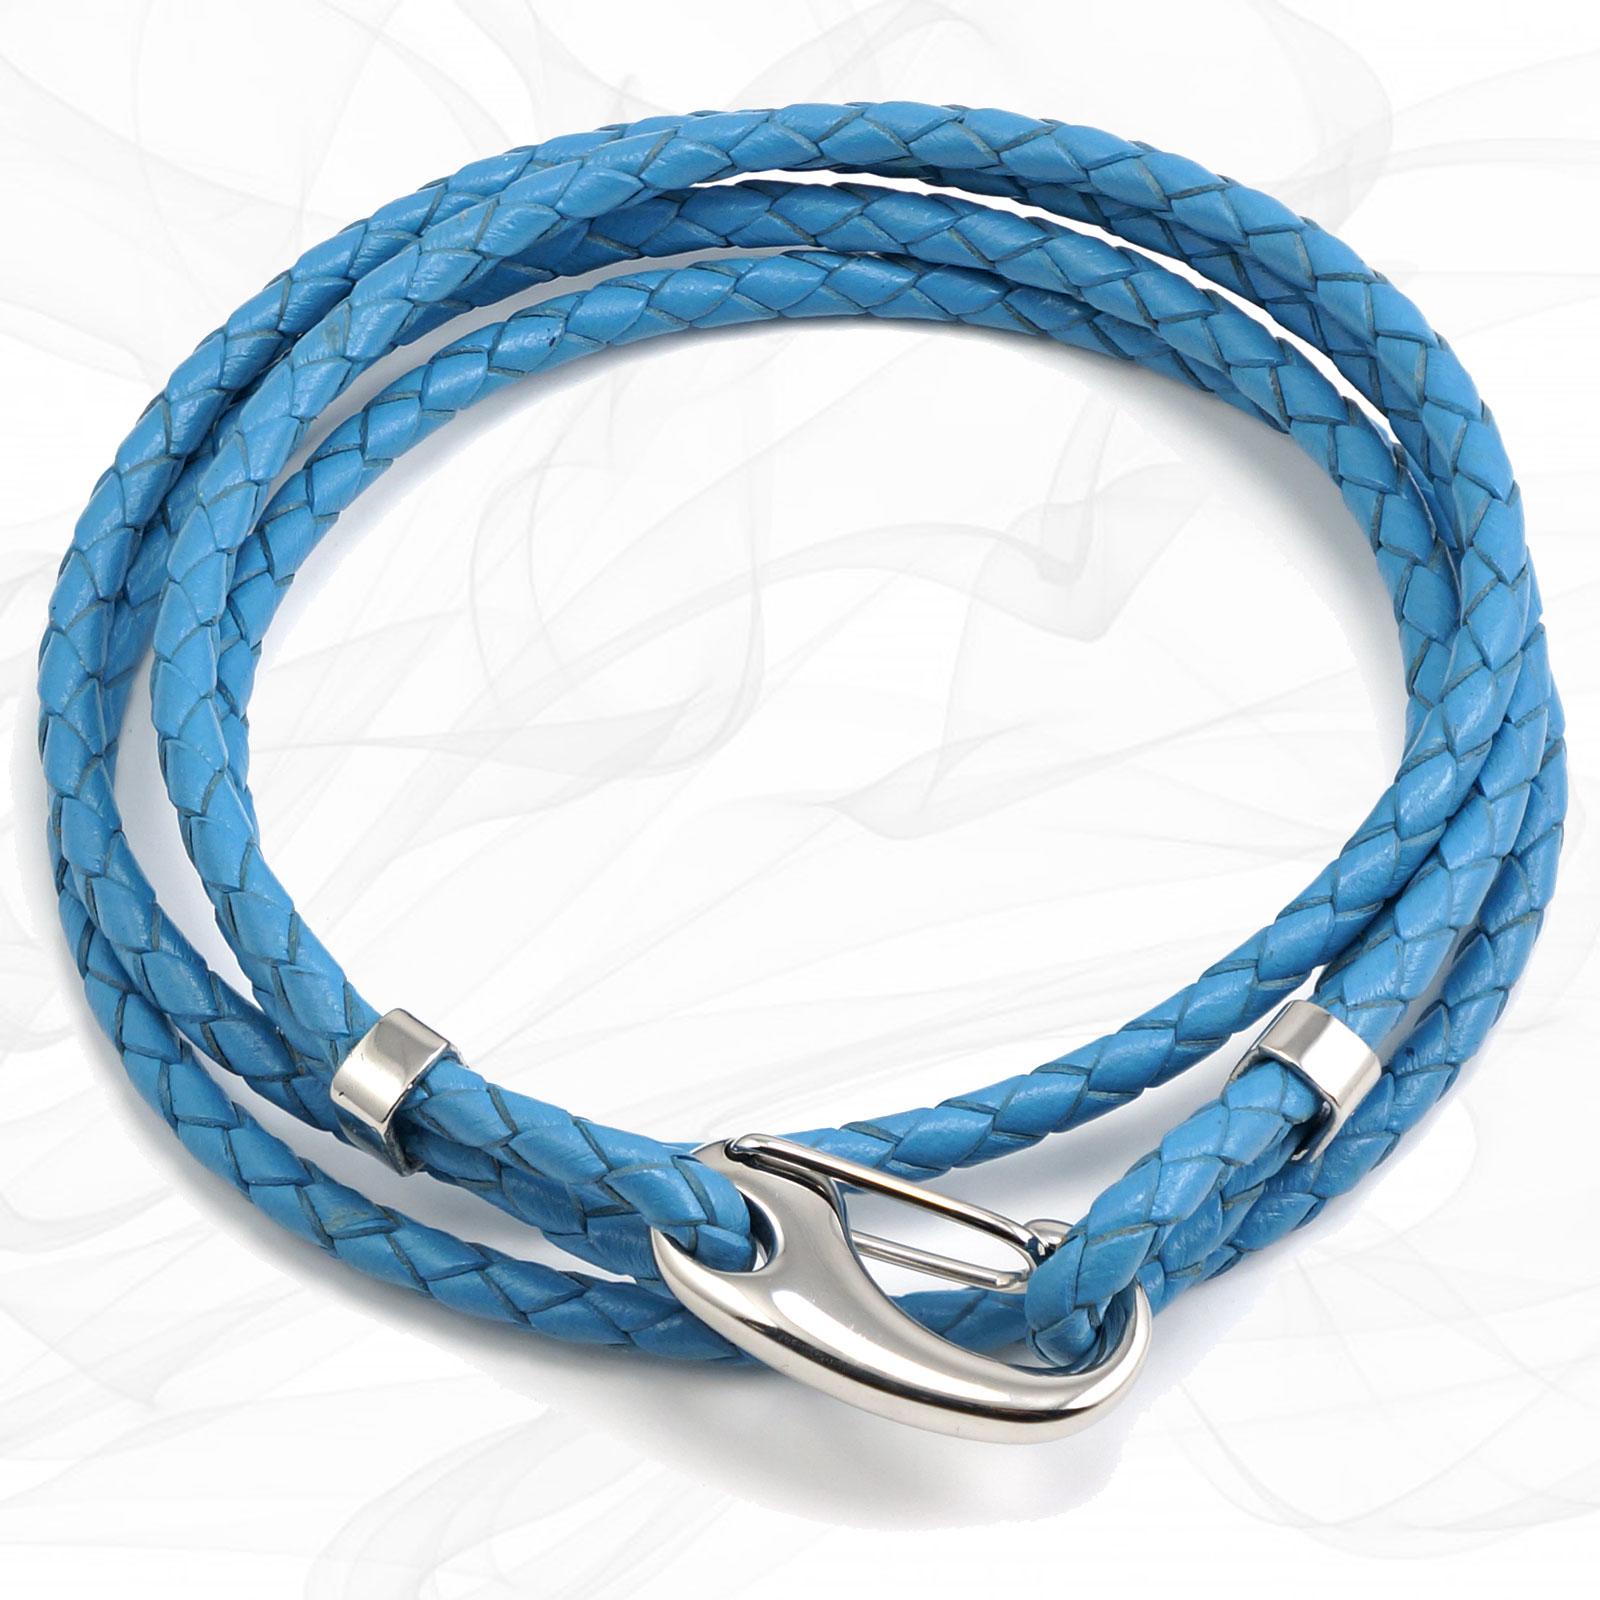 Blue Four Strap Bolo Leather Bracelet with a Petit Steel Lobster Clasp